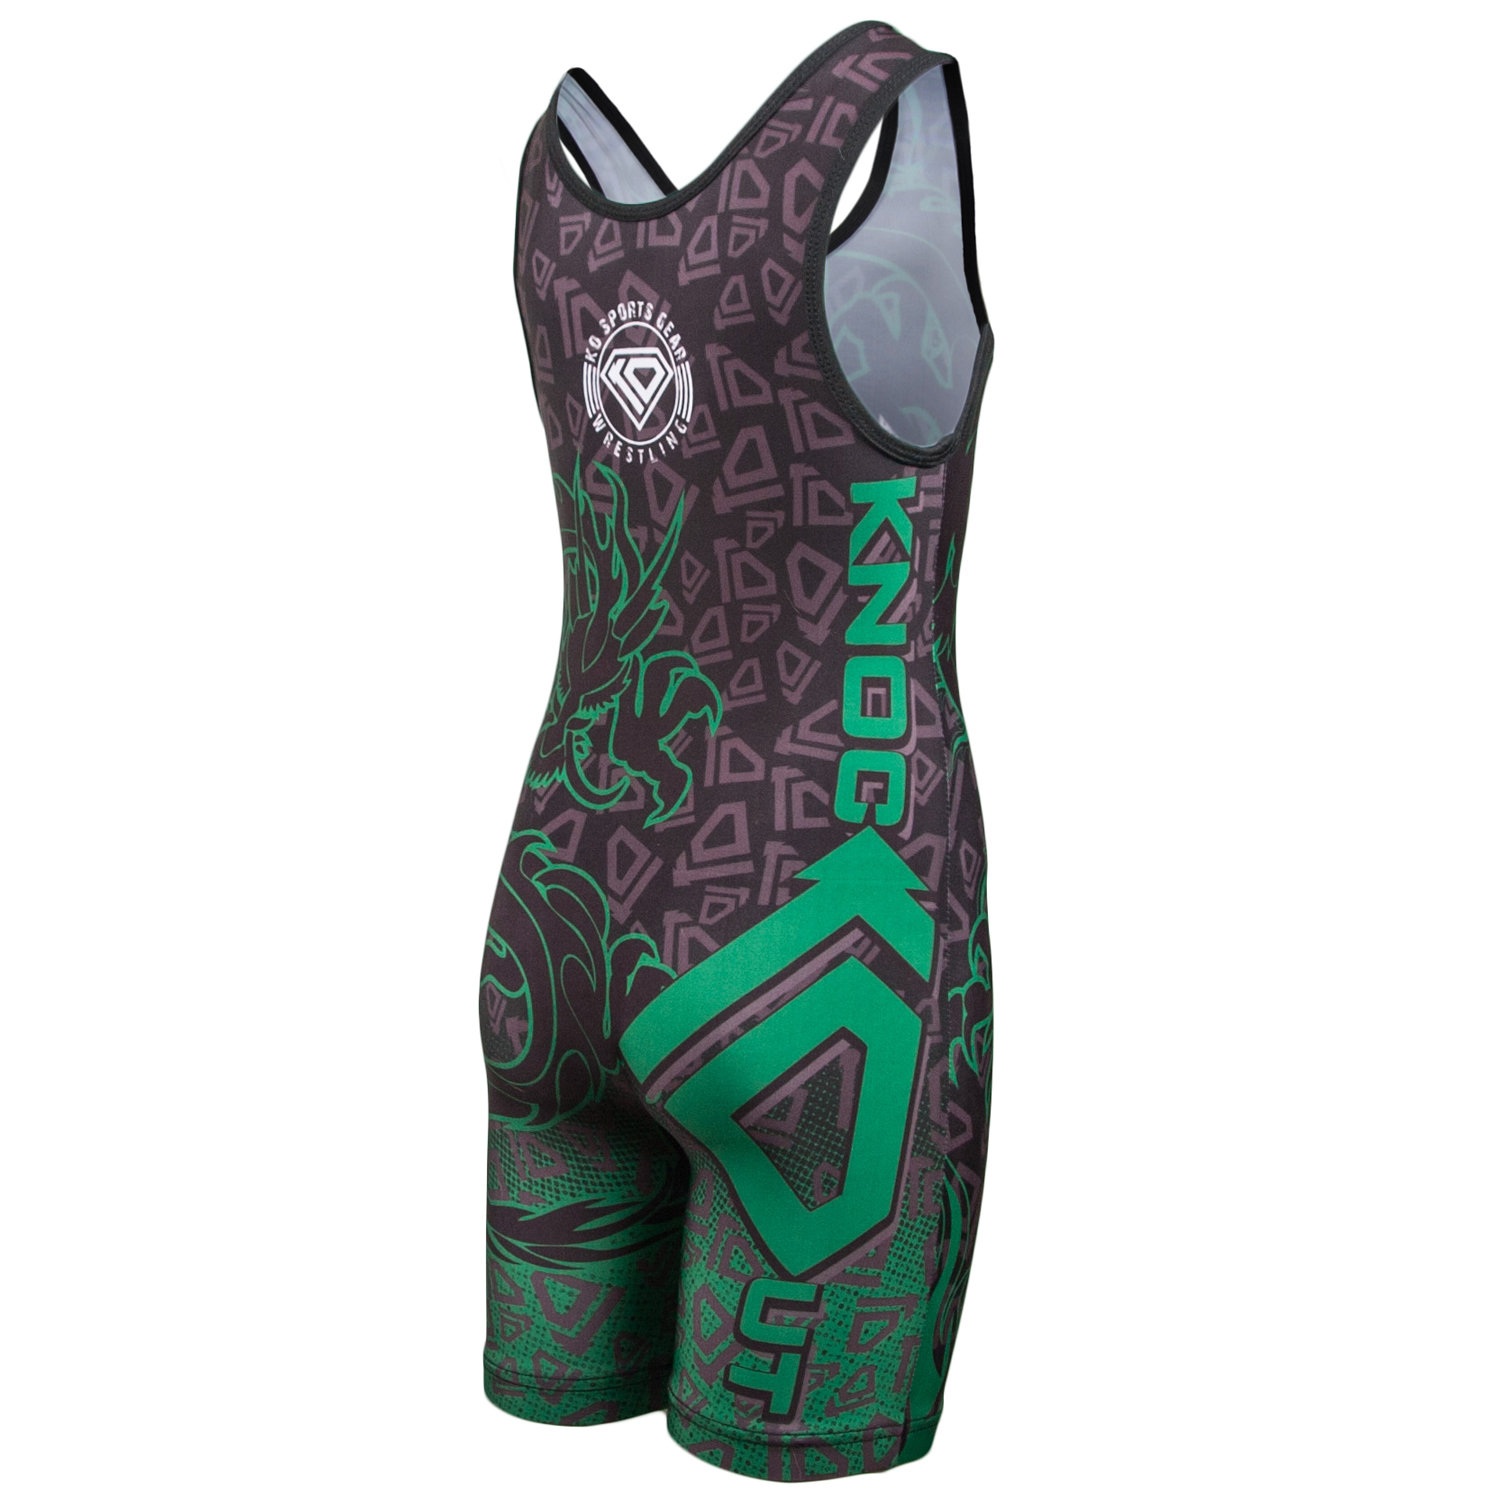 Closeout Priced KO Sports Gear Muscle Wrestling Singlet 